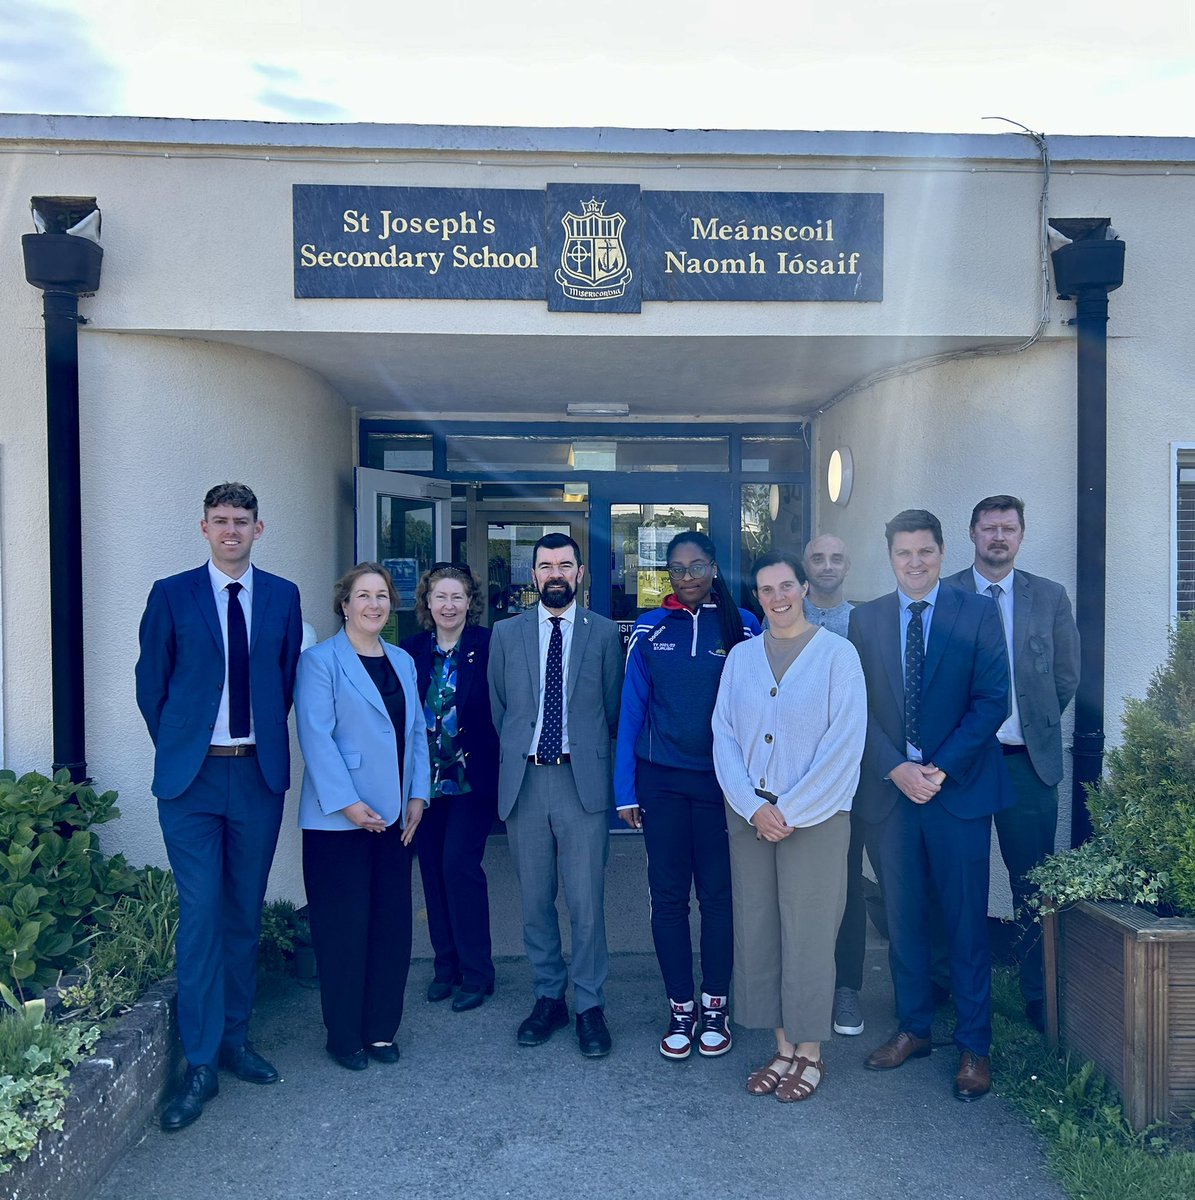 We had a great day celebrating #EuropeDay 2024 with lots of events & activities for our students, including a visit from MEP @BarryAndrewsMEP, Senator @LorrCliff, the Luxembourg Ambassador to Ireland & Minister @joefingalgreen who answered questions from our students 🇪🇺🇪🇺